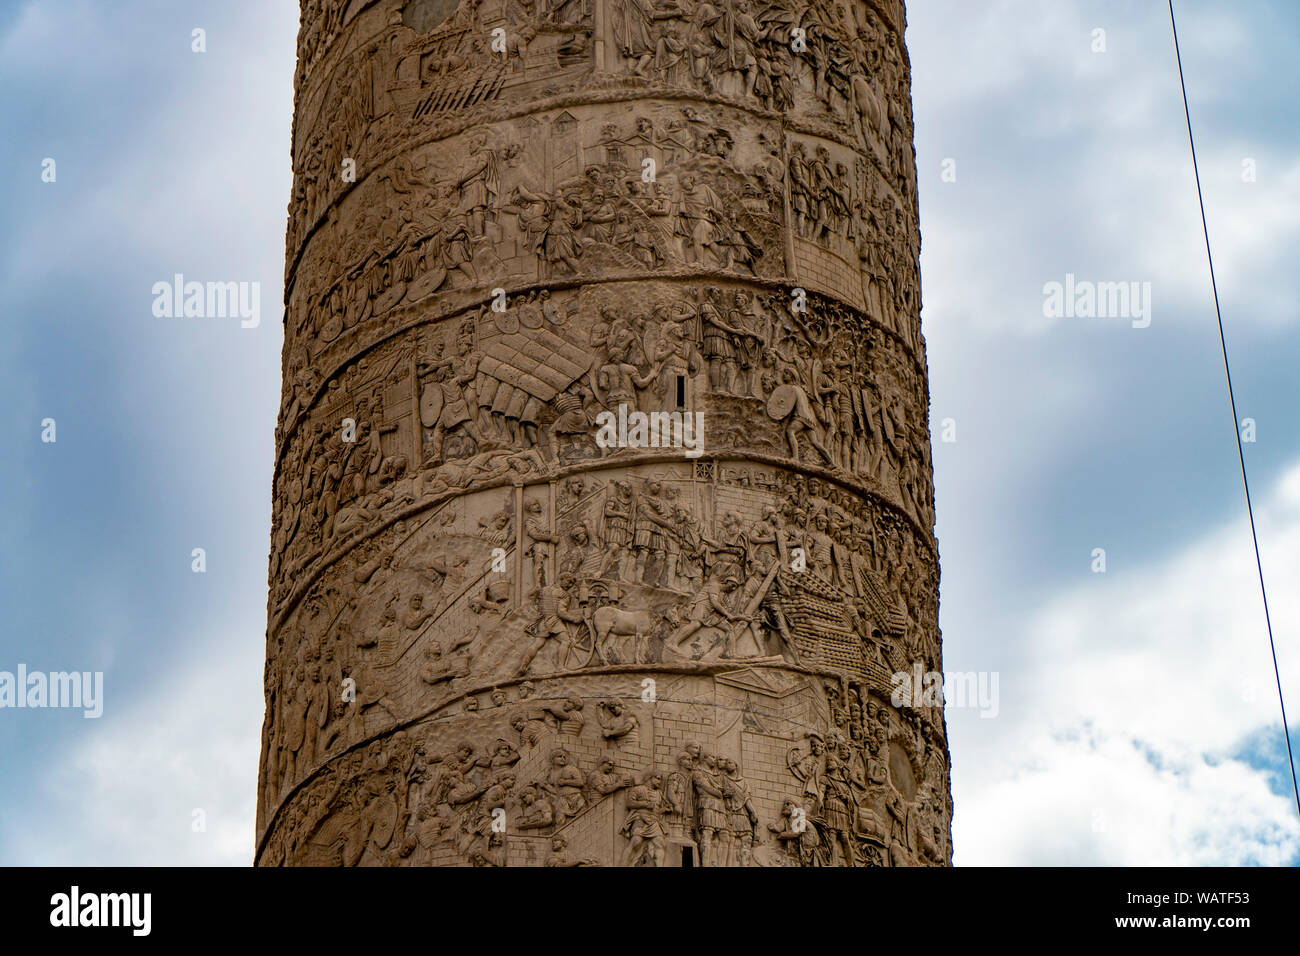 Colonna Traiana, detail of the bas-relief scenes of the Traja 's Column in Rome Stock Photo